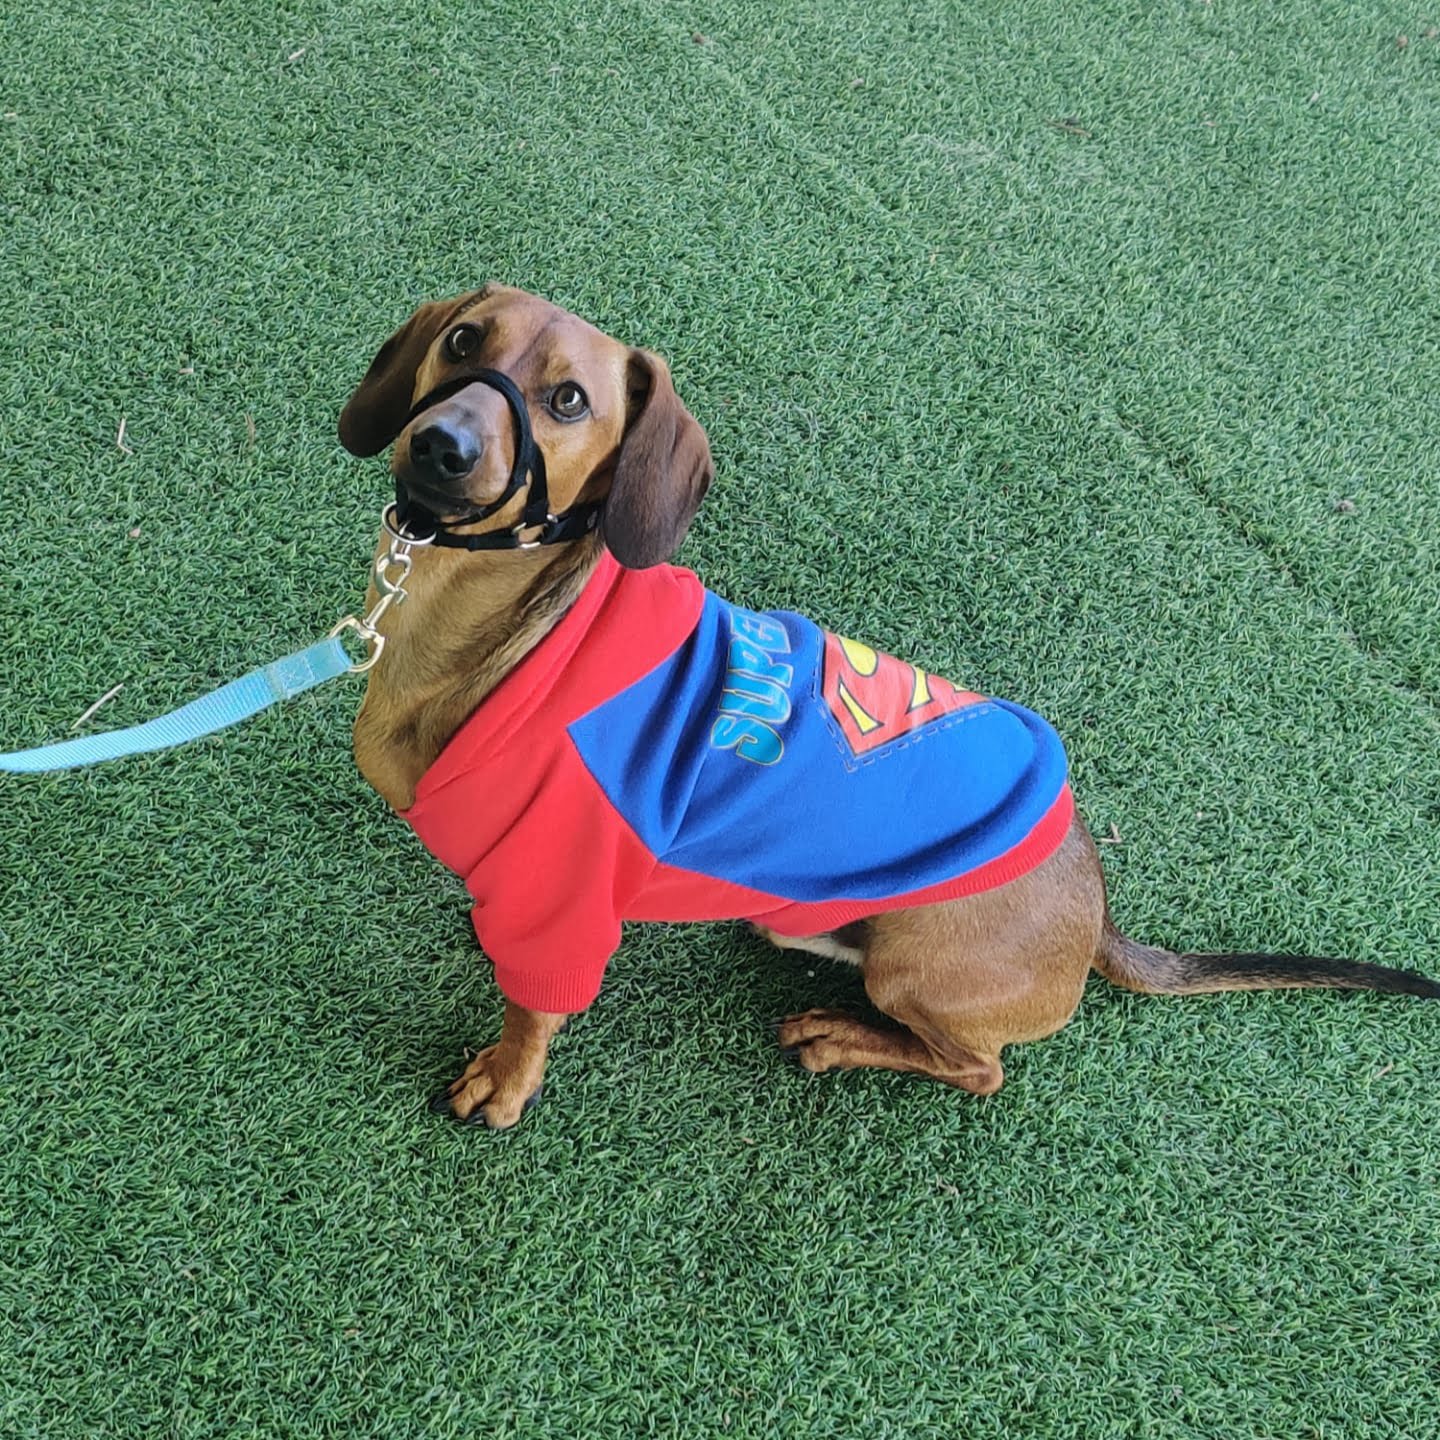 Beginners Guide To Training A Dachshund